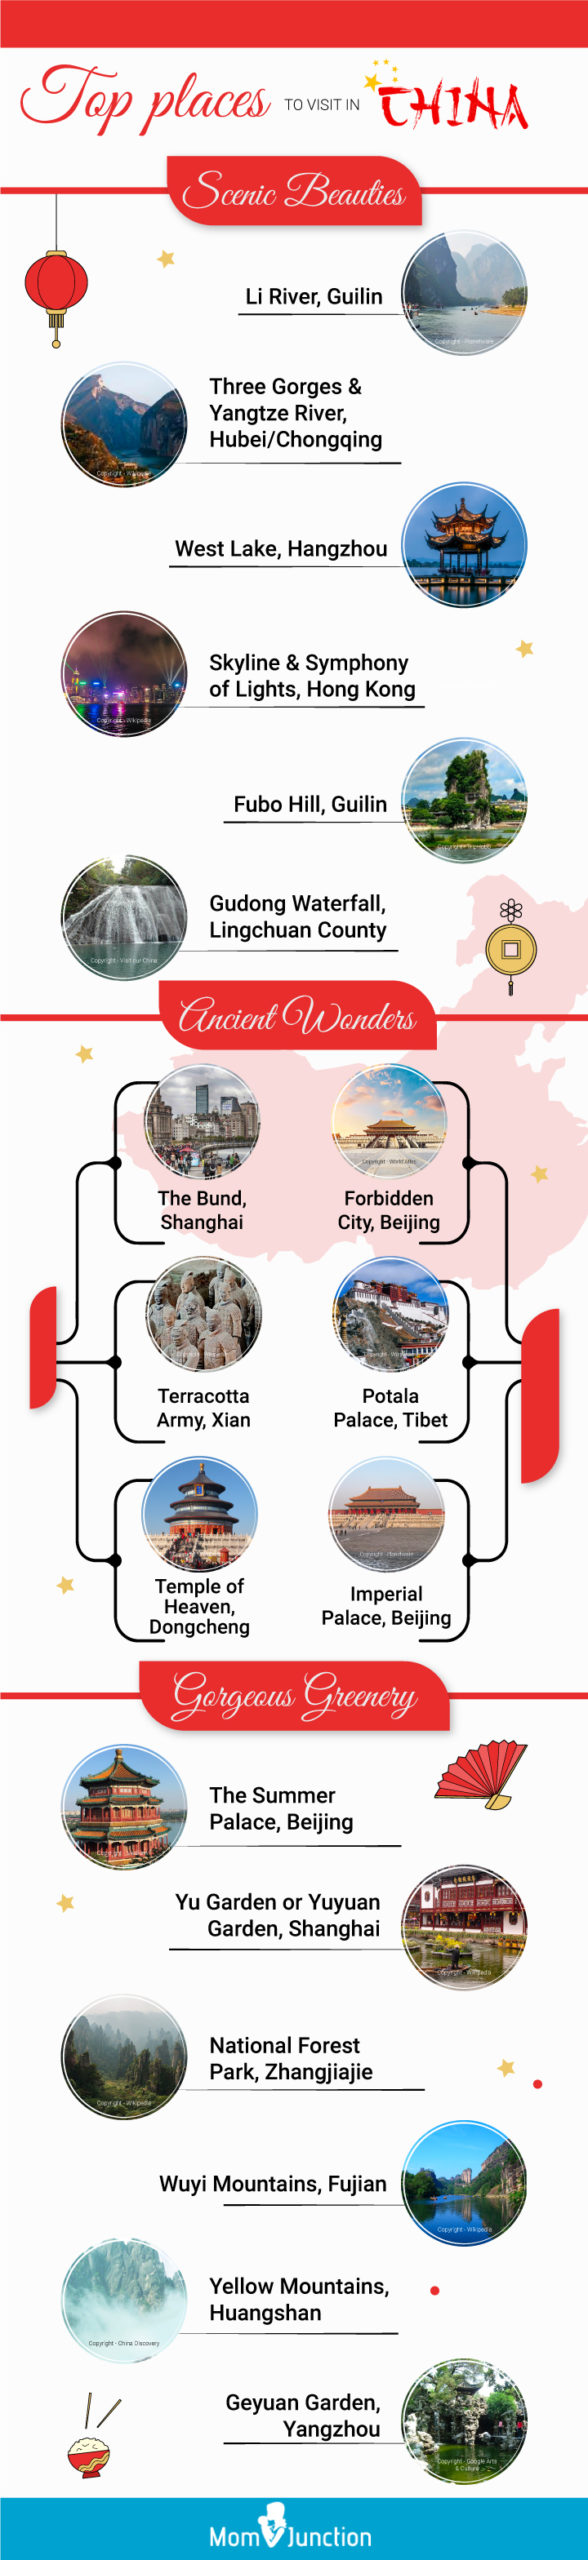 tops places to visit in china (infographic)